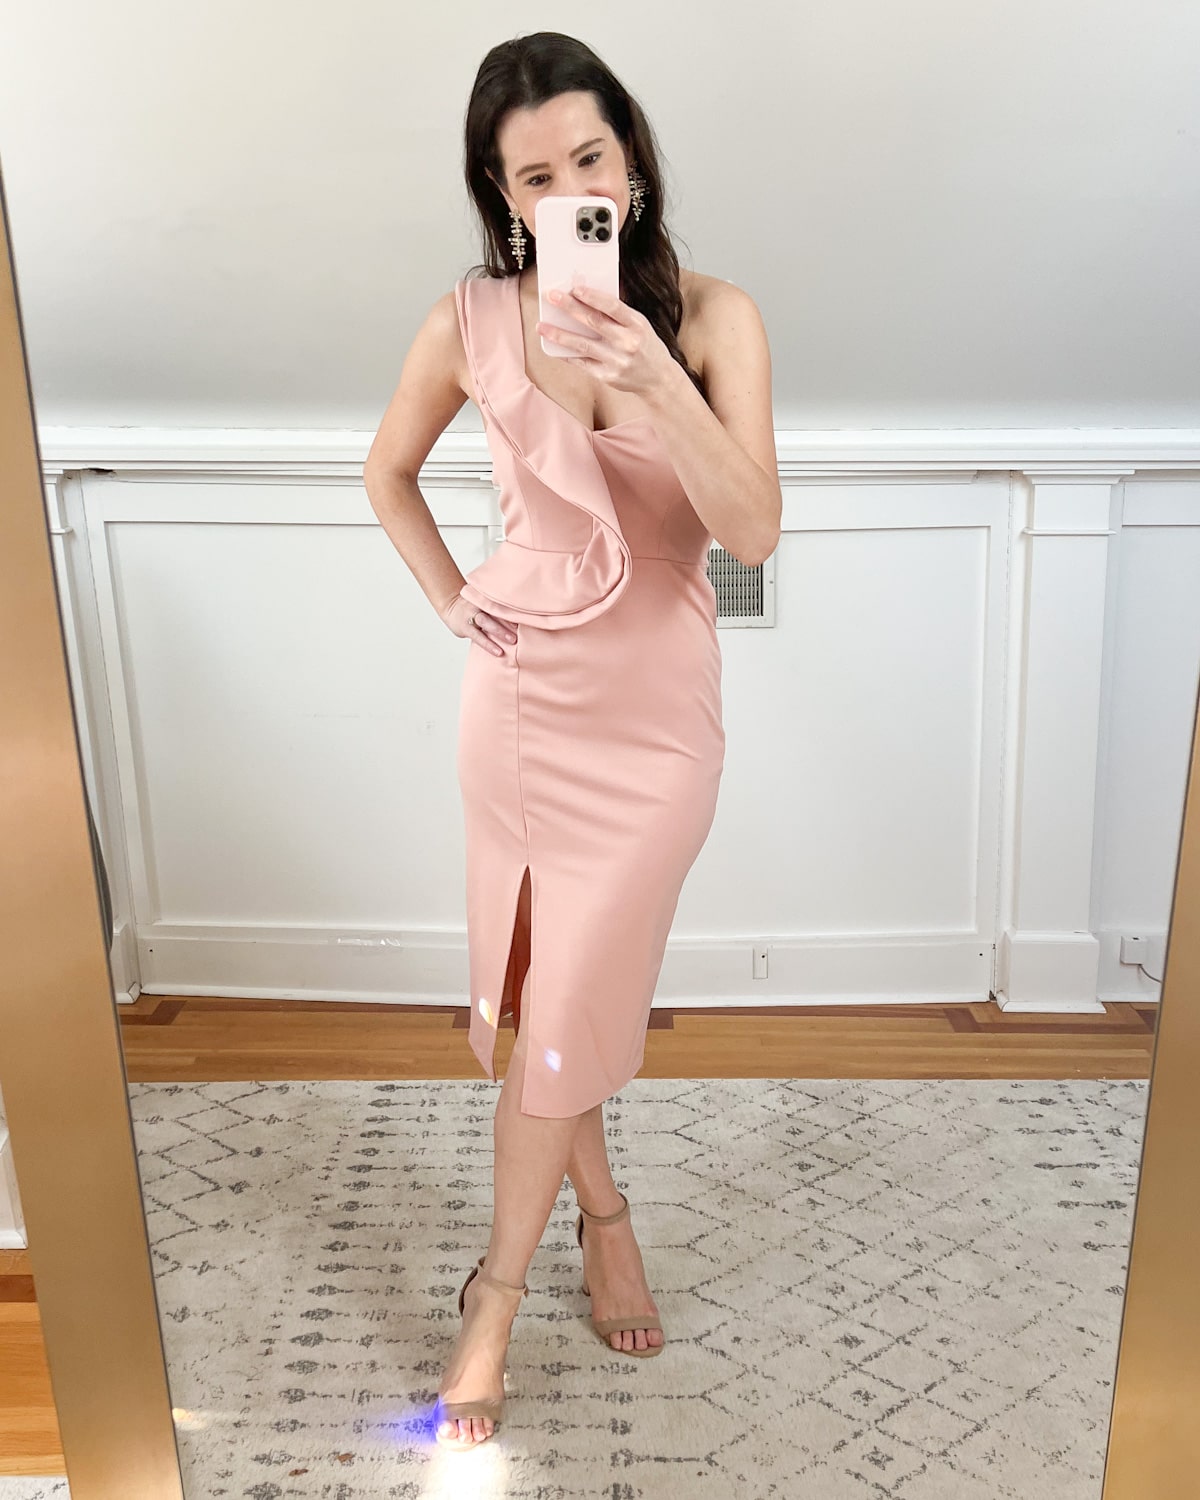 Pink Amazon cocktail dress for Christmas party styled with Kendra Scott Madelyn statement earrings and tan block heel sandals by affordable fashion blogger Stephanie Ziajka on Diary of a Debutante